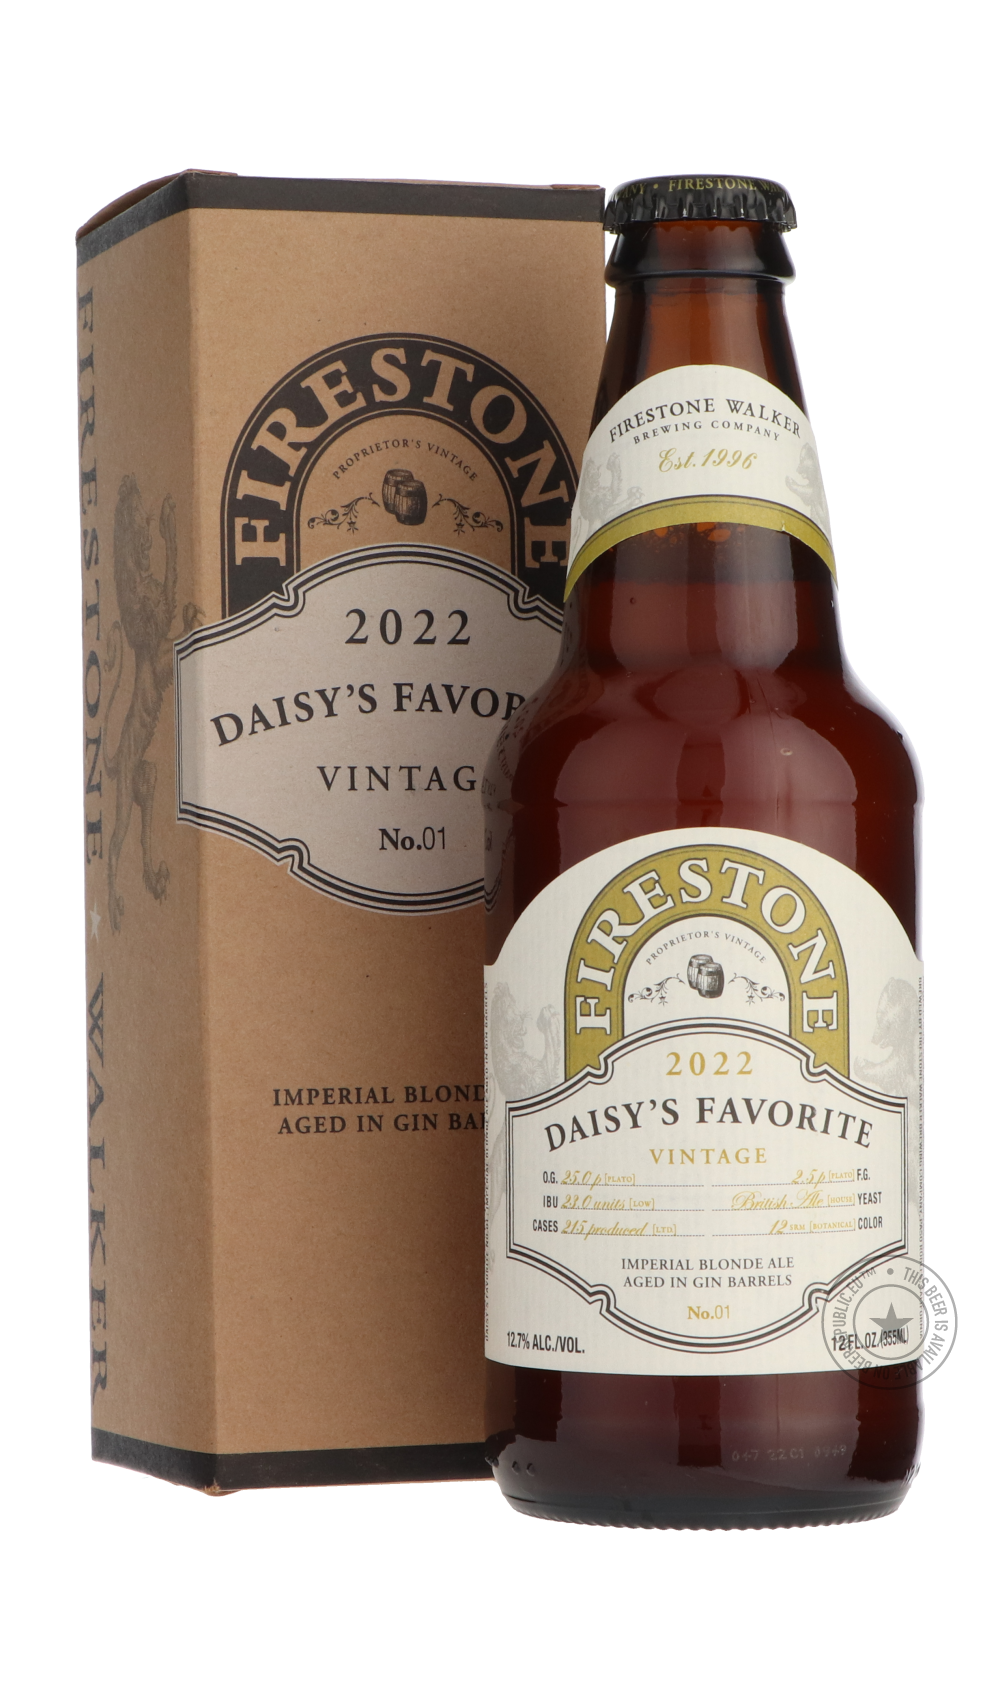 -Firestone Walker- Daisy's Favorite-Pale- Only @ Beer Republic - The best online beer store for American & Canadian craft beer - Buy beer online from the USA and Canada - Bier online kopen - Amerikaans bier kopen - Craft beer store - Craft beer kopen - Amerikanisch bier kaufen - Bier online kaufen - Acheter biere online - IPA - Stout - Porter - New England IPA - Hazy IPA - Imperial Stout - Barrel Aged - Barrel Aged Imperial Stout - Brown - Dark beer - Blond - Blonde - Pilsner - Lager - Wheat - Weizen - Ambe